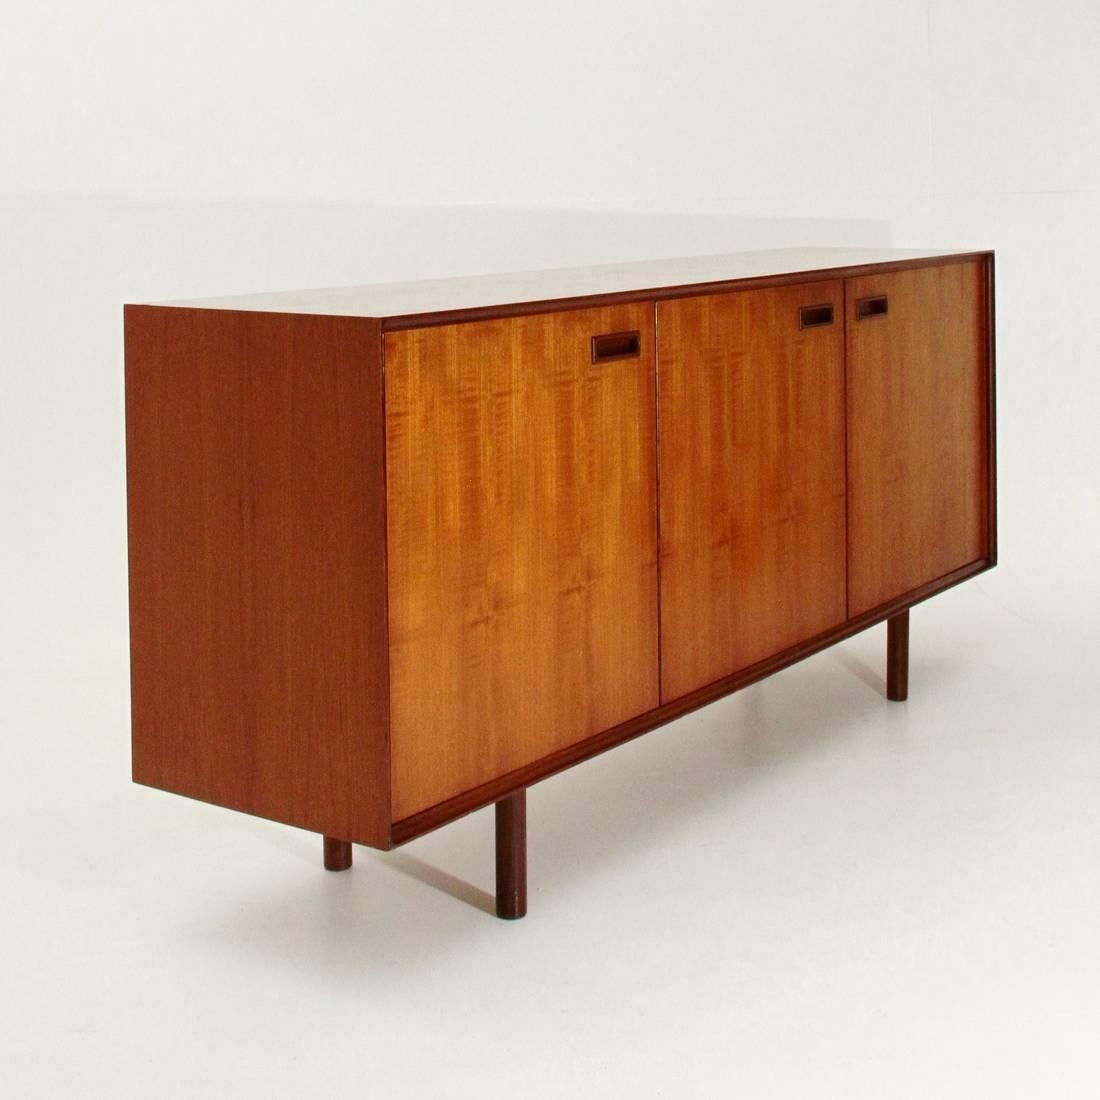 Sideboard of the 1960s in veneered wood.
Frontal frame with grooved groove, three compartments with door opening and internal shelves.
Wooden handle.
Three internal drawers, the first with separators.
Legs in solid cylindrical wood.
Good